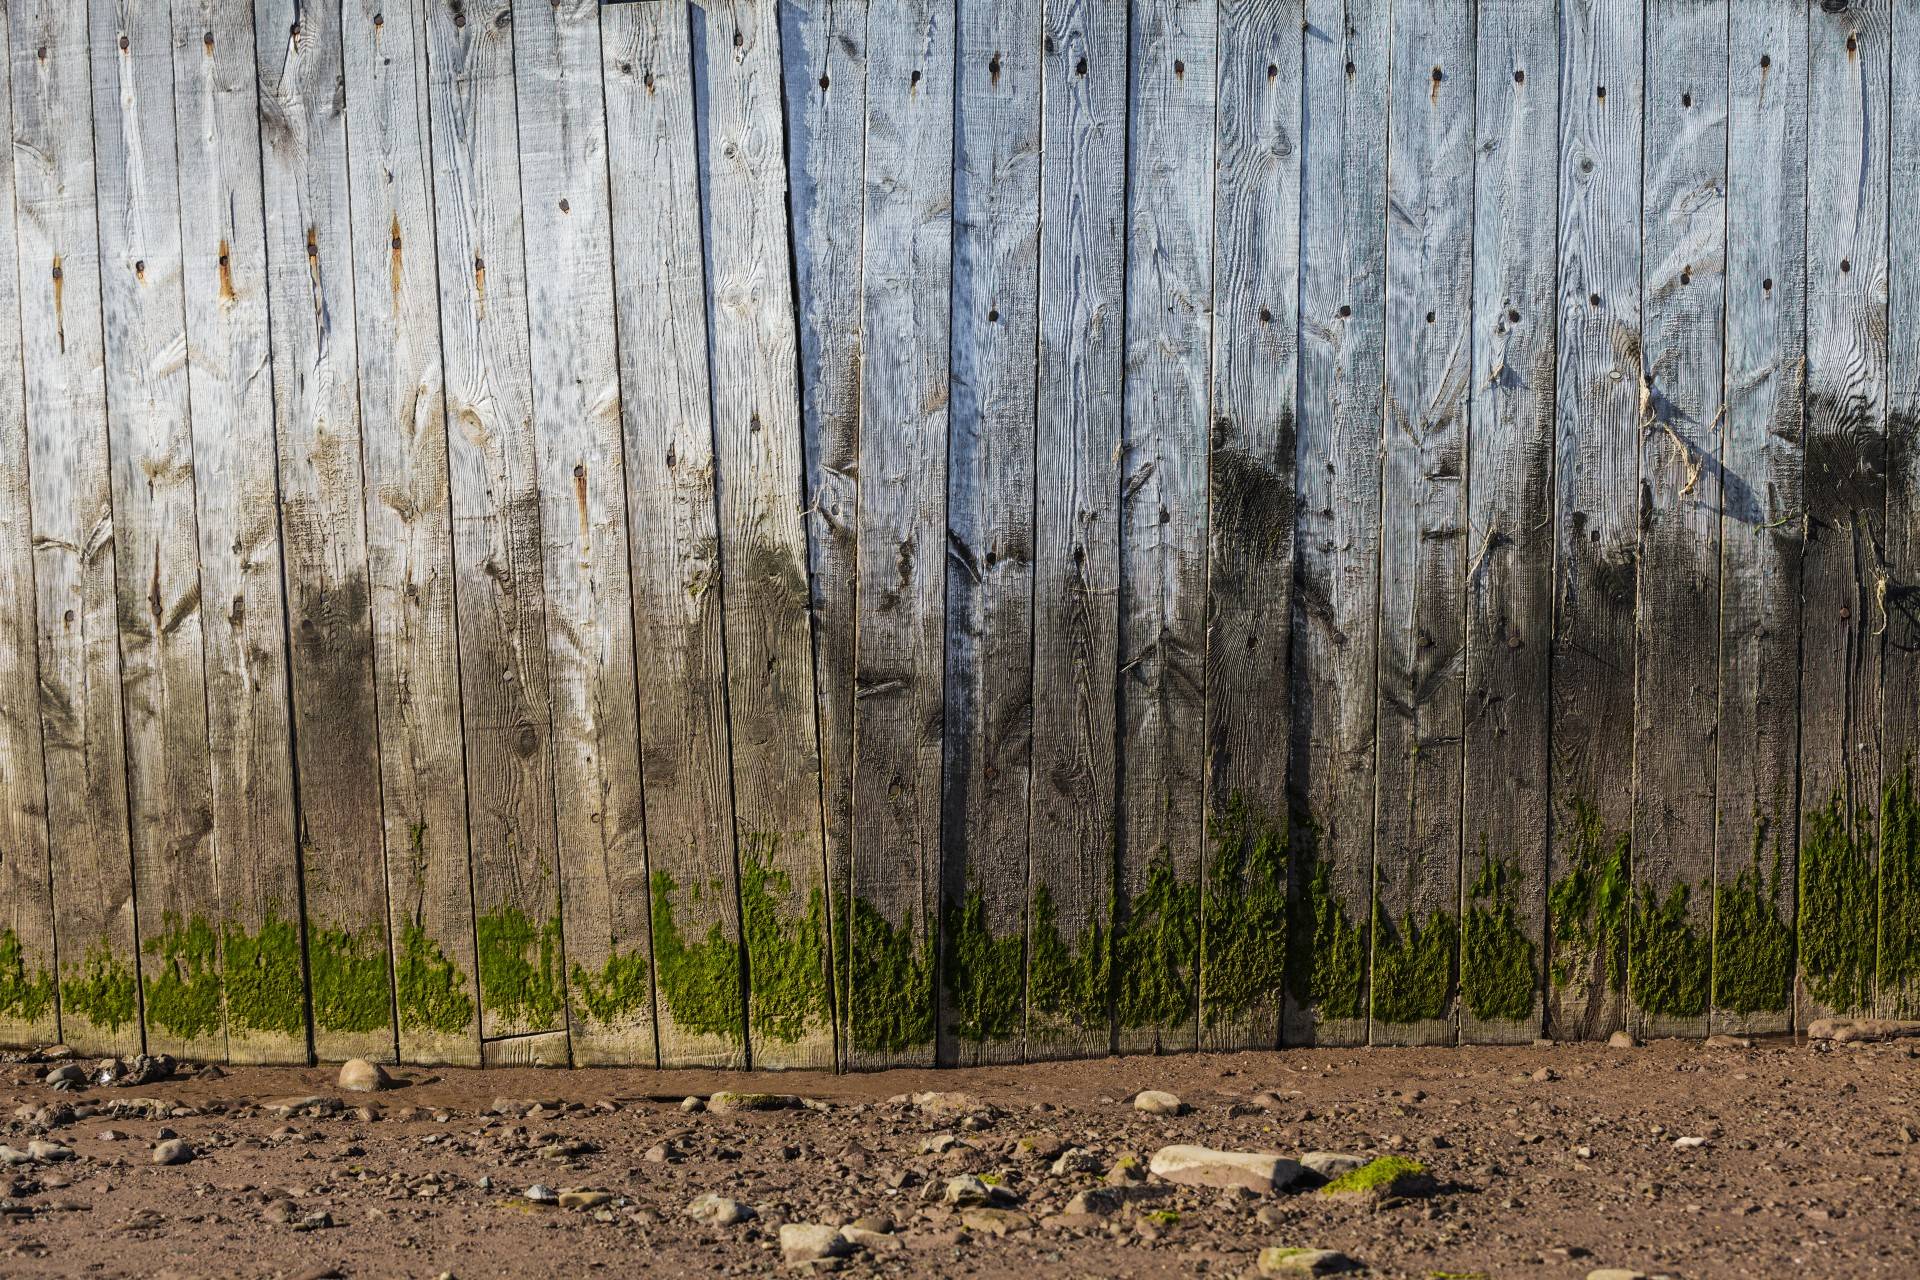 run down wooden fence with partially stained planks and dirt ground